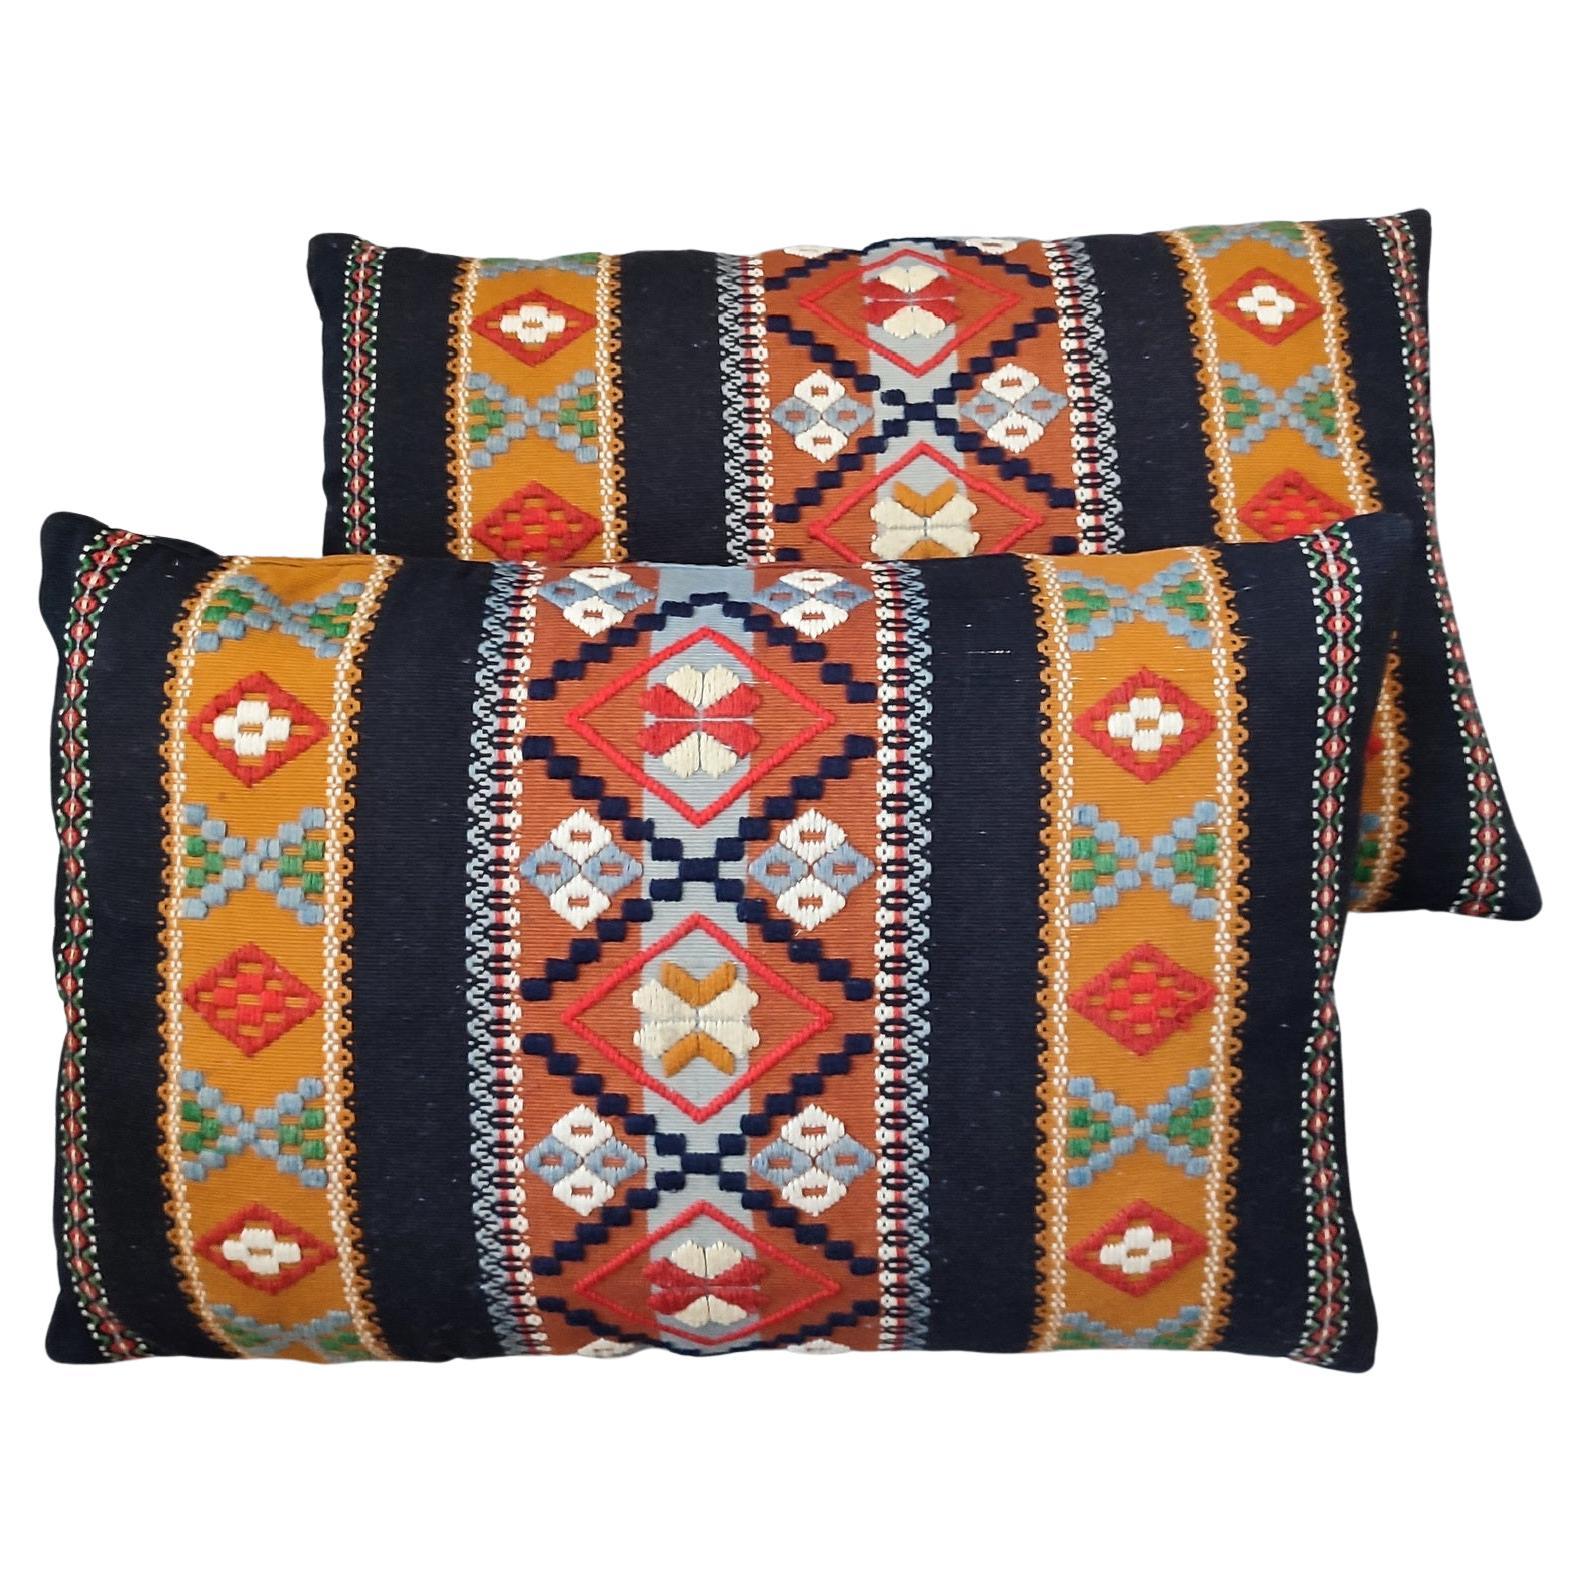 Flatweave Pair of Large Pillows, Sweden, Early 20th Century For Sale